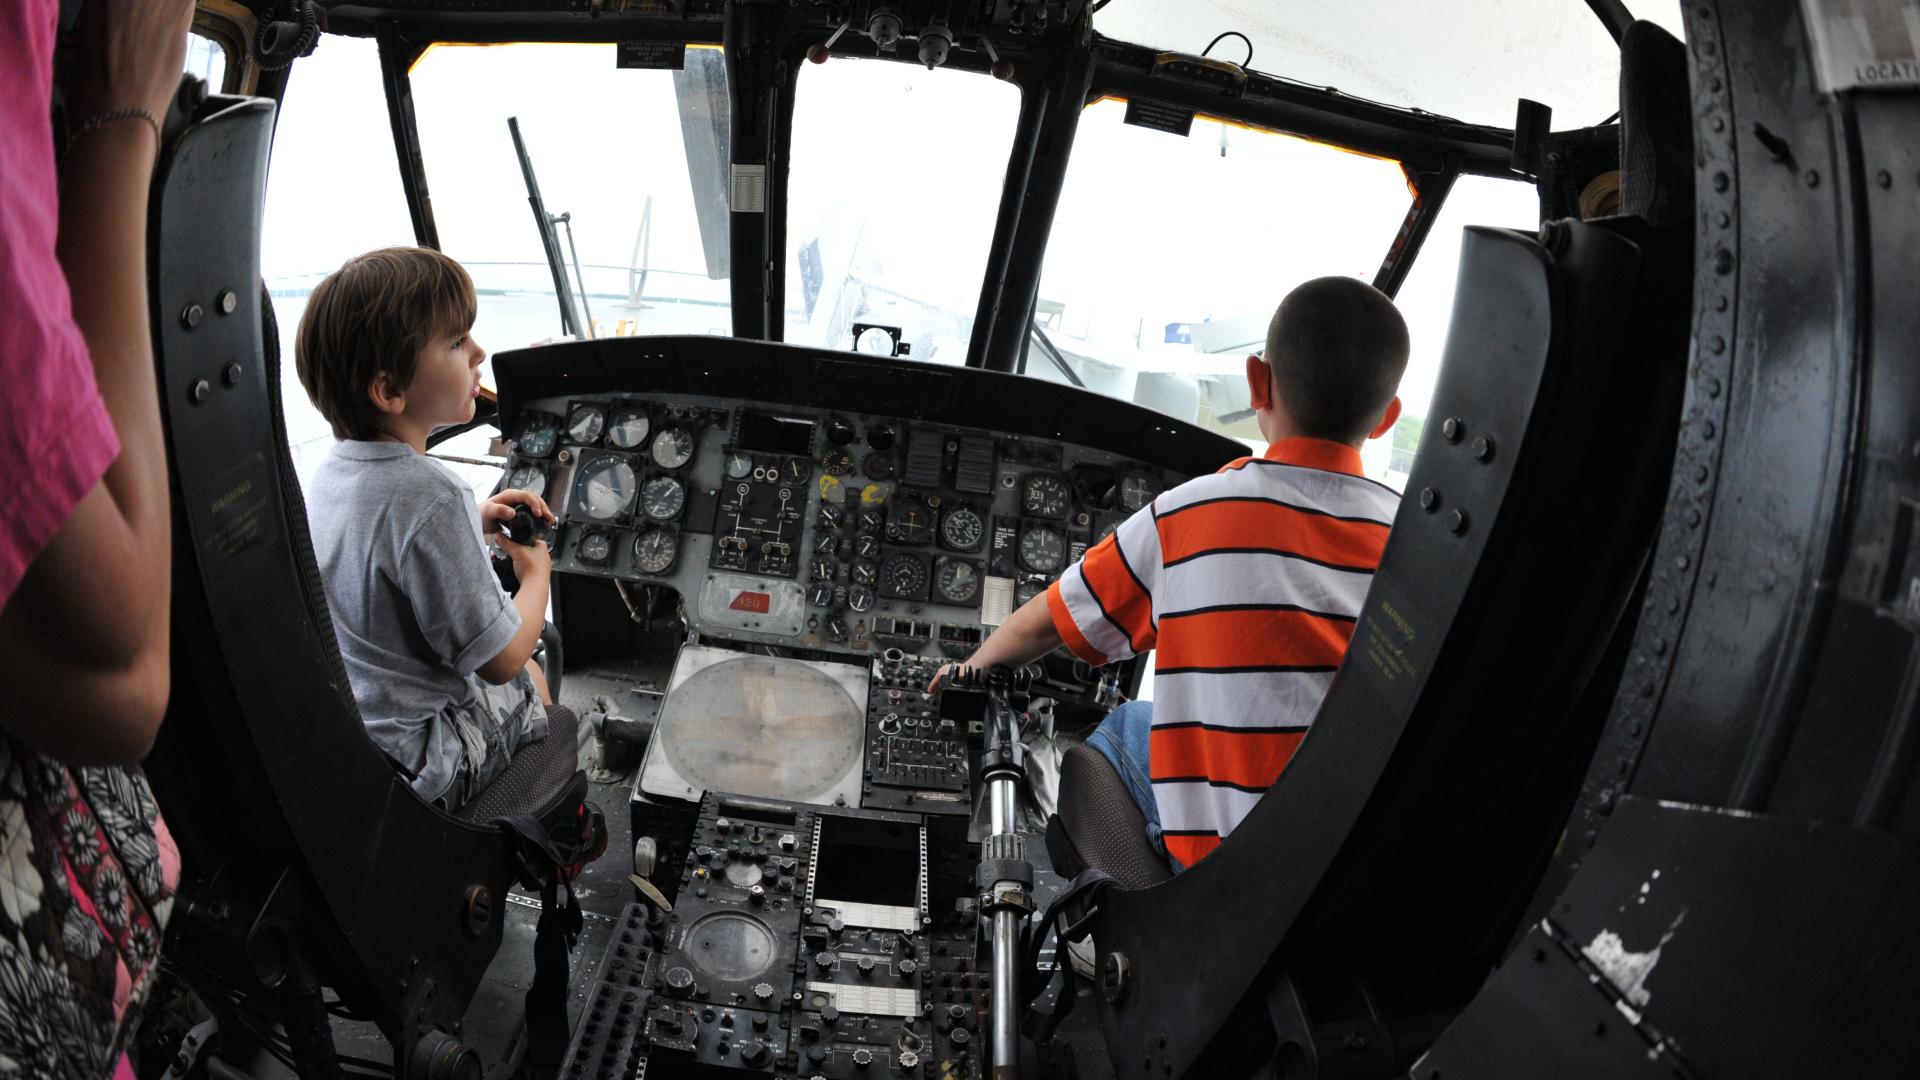 Two boys sit in the front of an aircraft by the controls